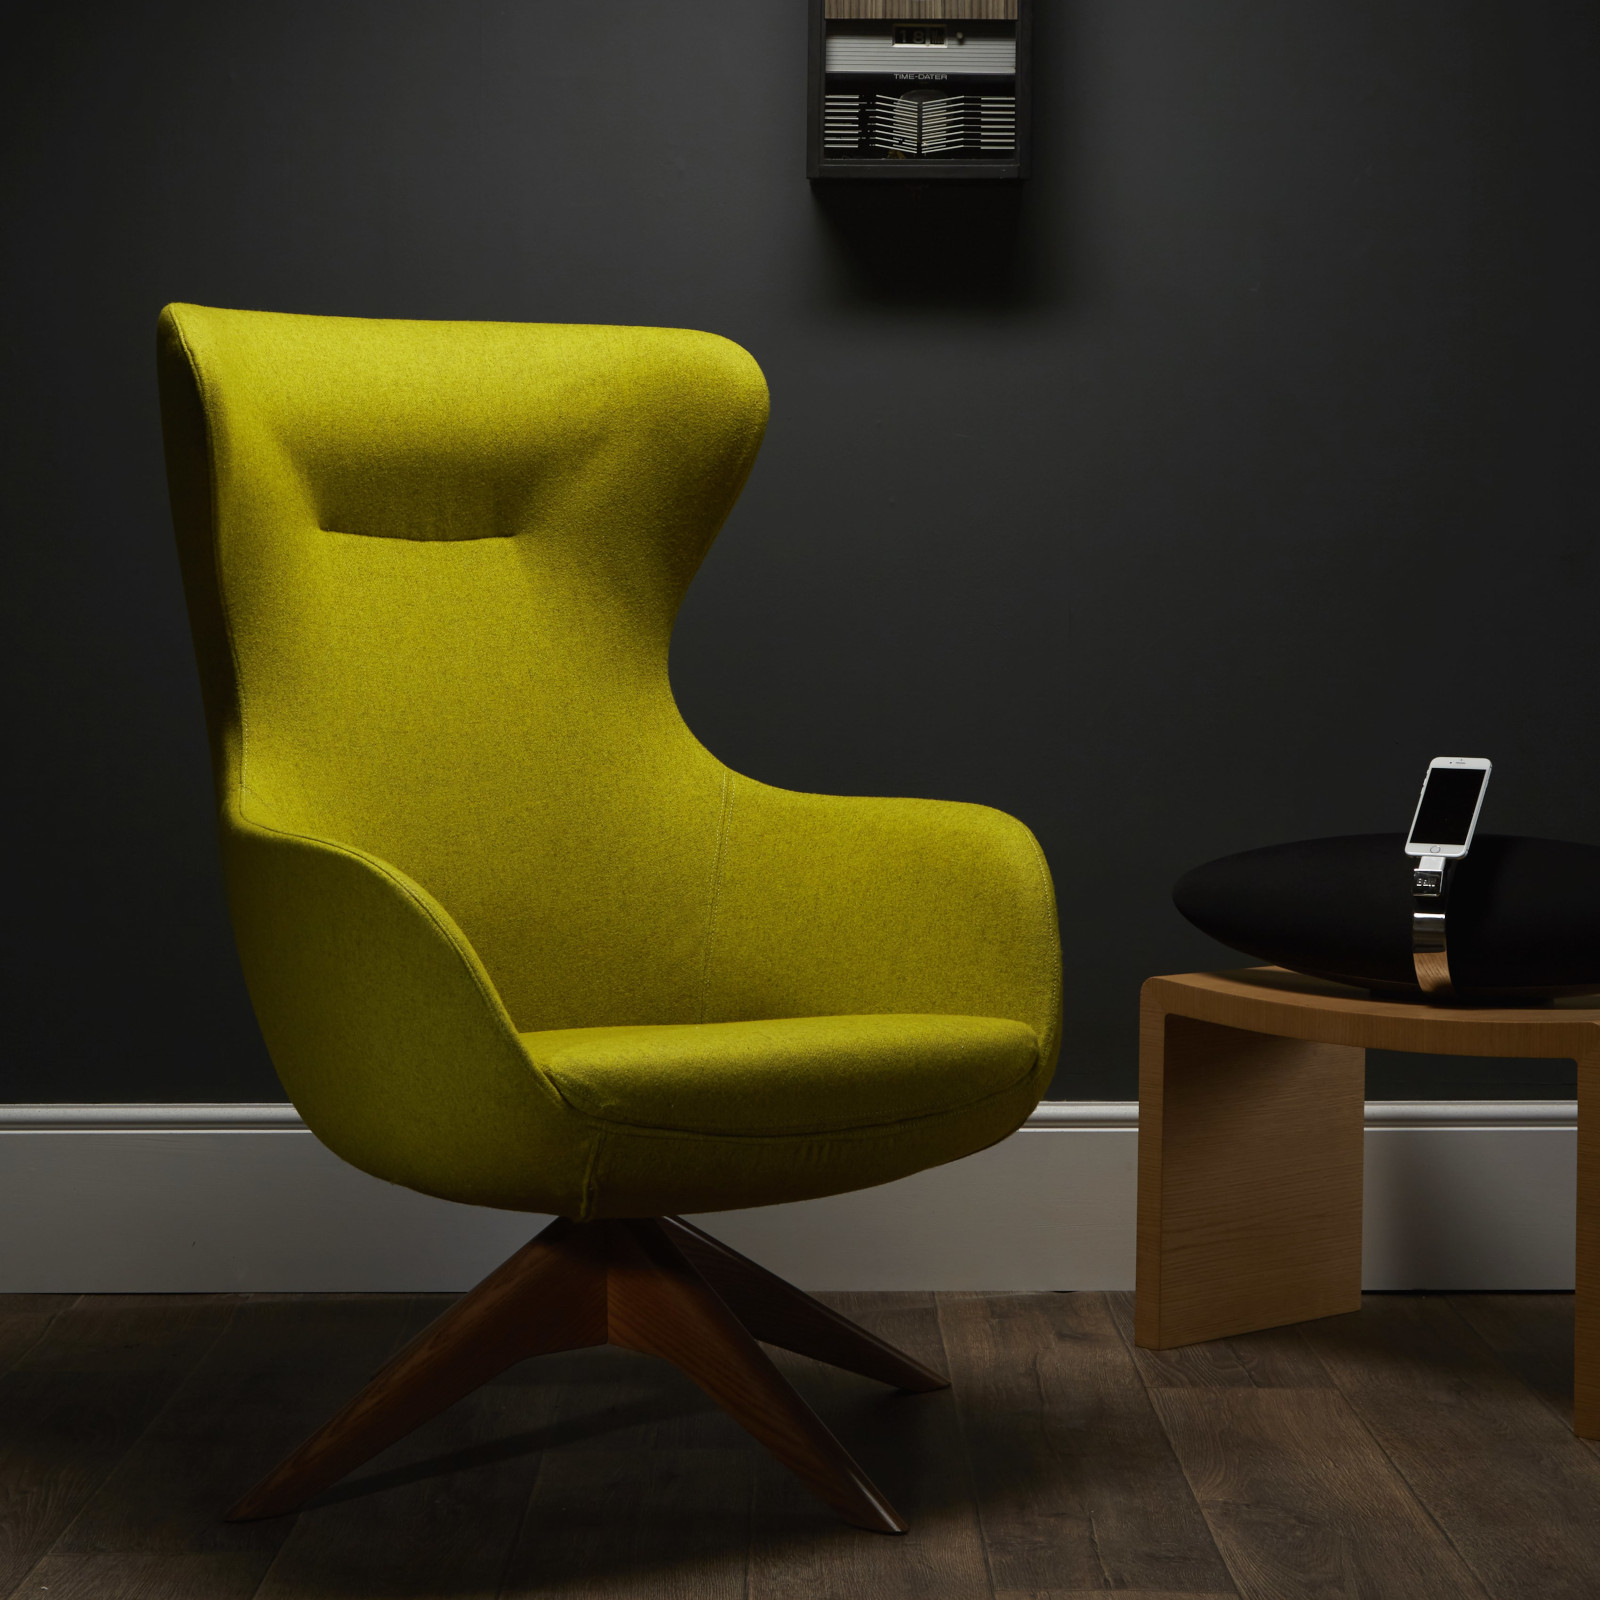 The Todd chair is our take on the original Egg Chair designed by Arne Jacobsen in the 1950's. Try it in our showrooms in Somerset & Hampshire